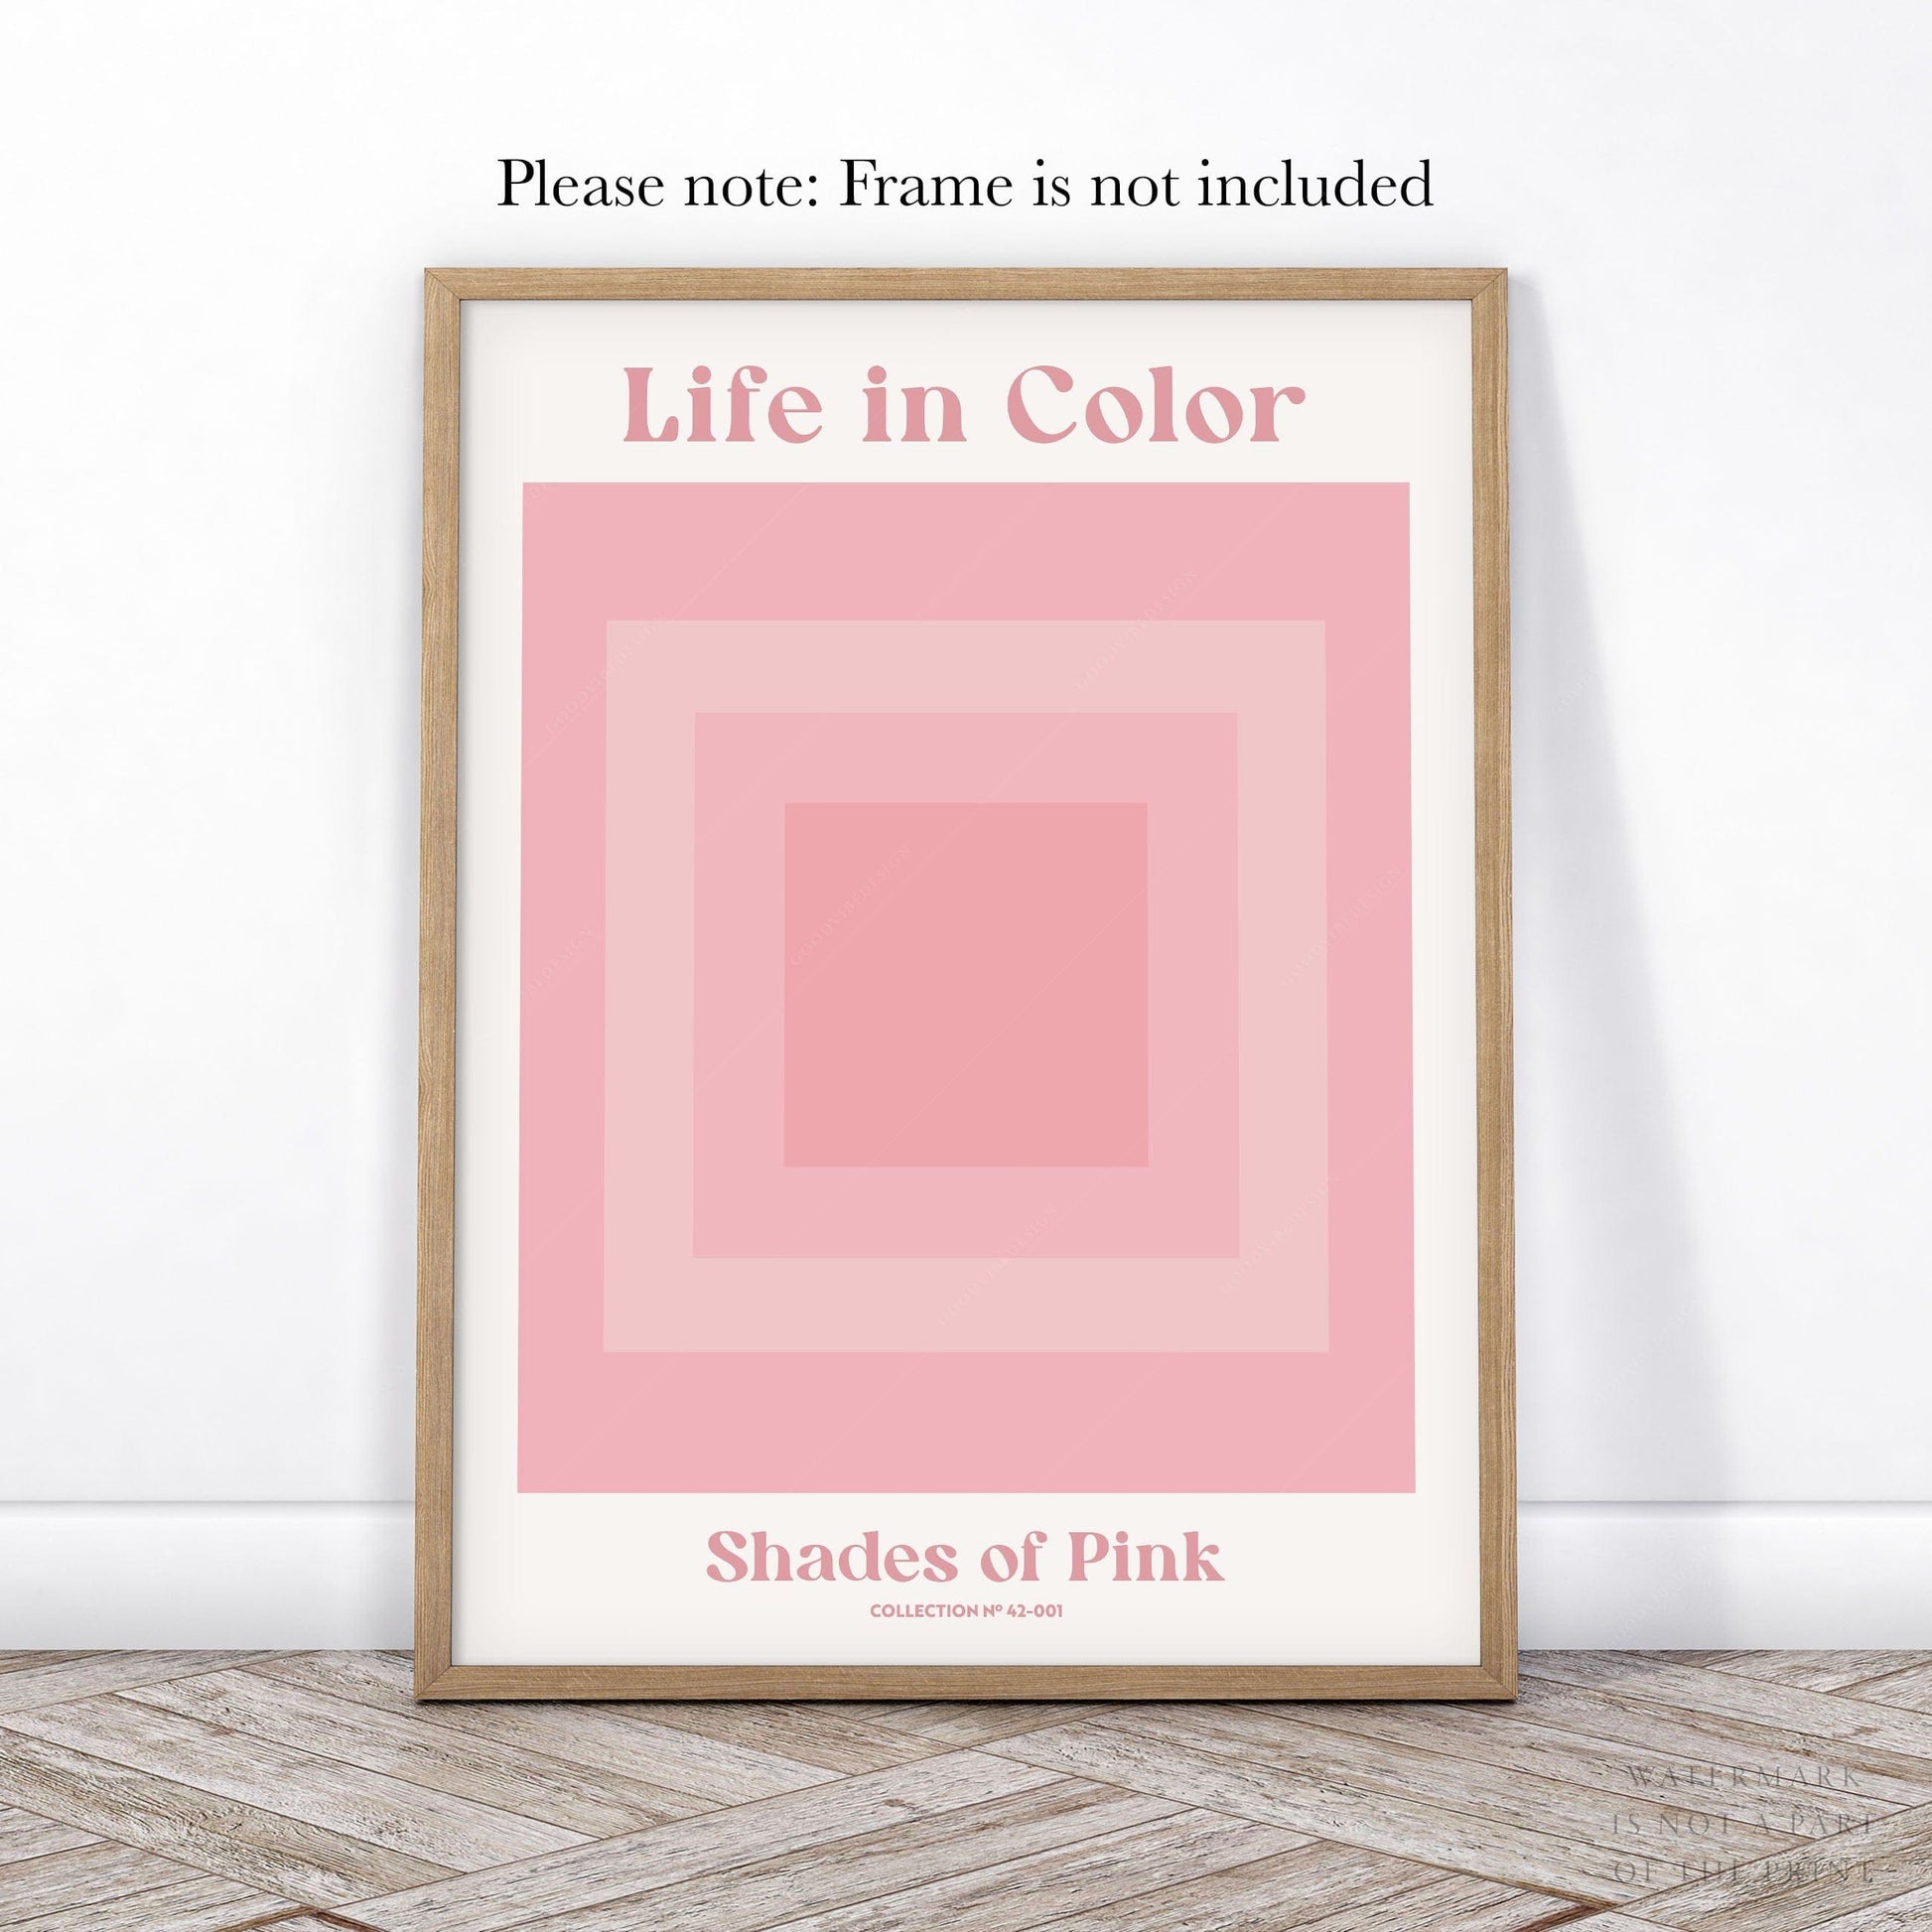 Home Poster Decor Pink Wall Art, Colorful Decor, Minimalist Artwork, Pink Room Decor, Abstract pink art, Modern apartment decor, Geometric shapes 1